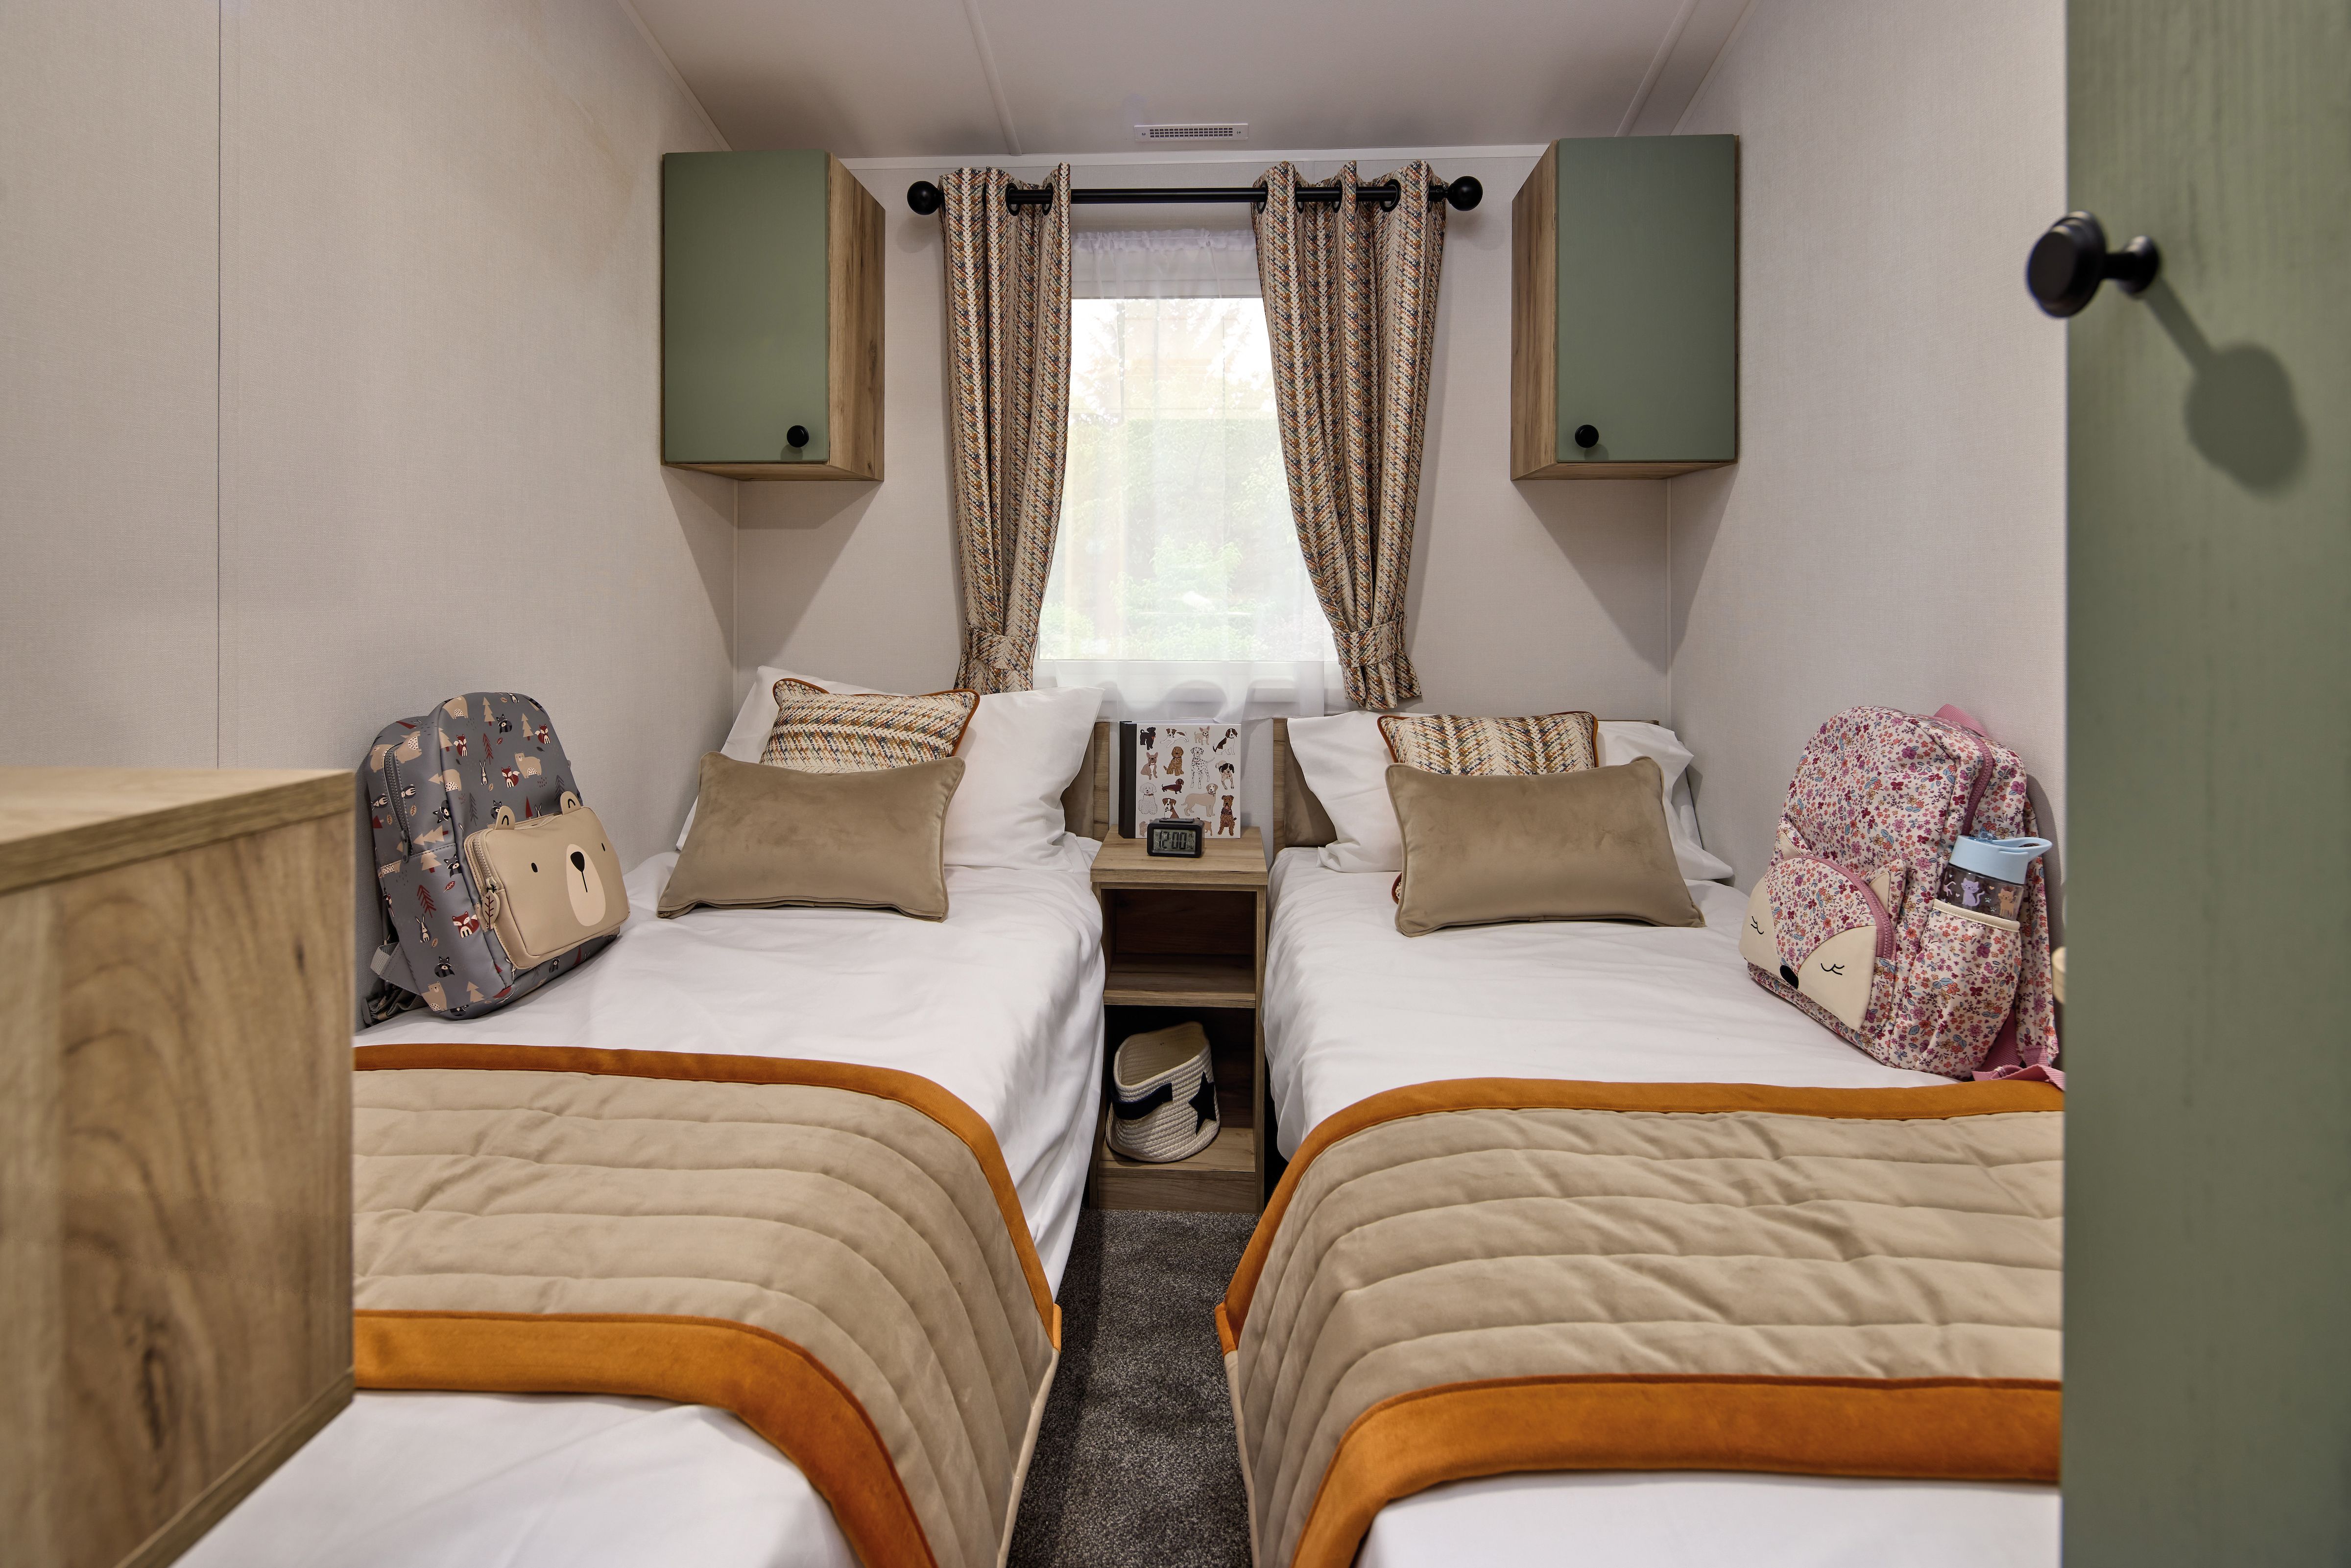 A twin bedroom in the Willerby Buxton holiday home. Two single beds have red throws to contrast with the green and cream colour scheme. A large window lets in plenty of light. 